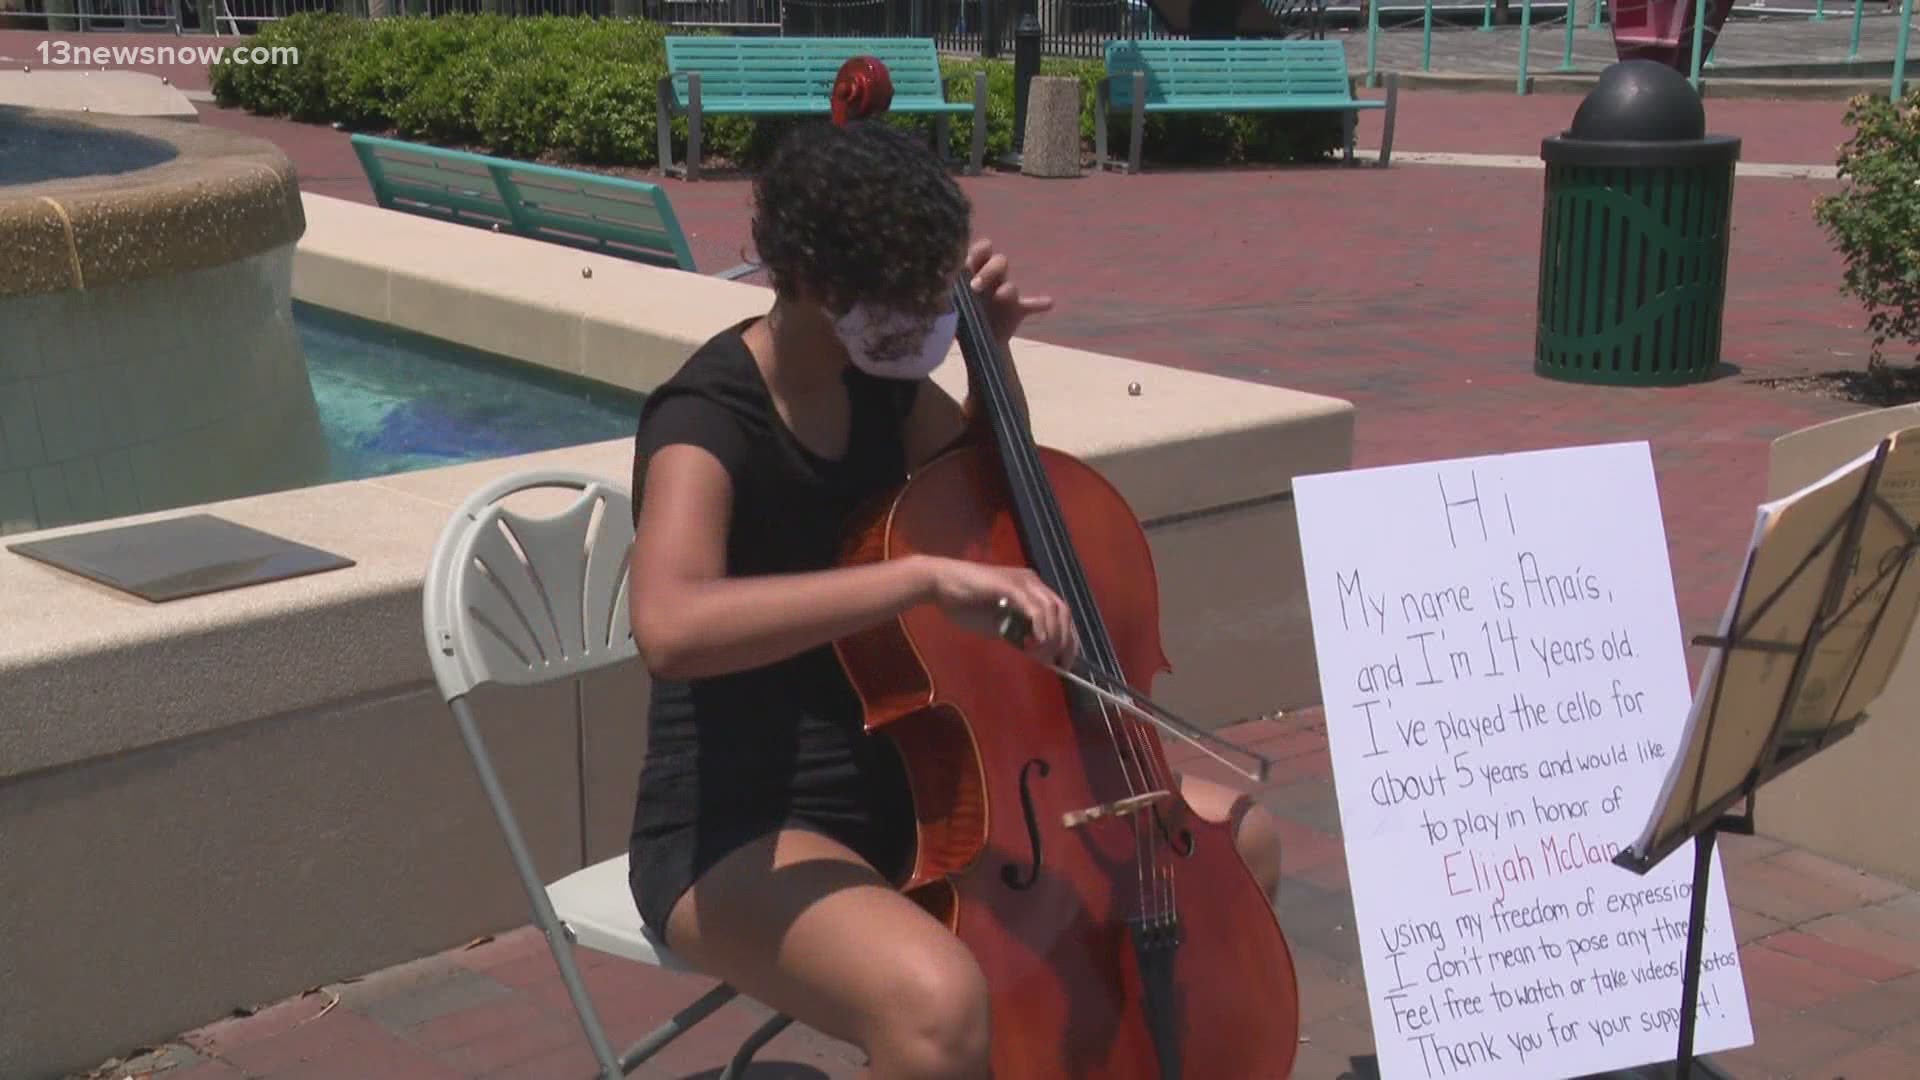 People young and old are finding ways to support the Black Lives Matter movement. For a Chesapeake teenager, she expressed herself through music.